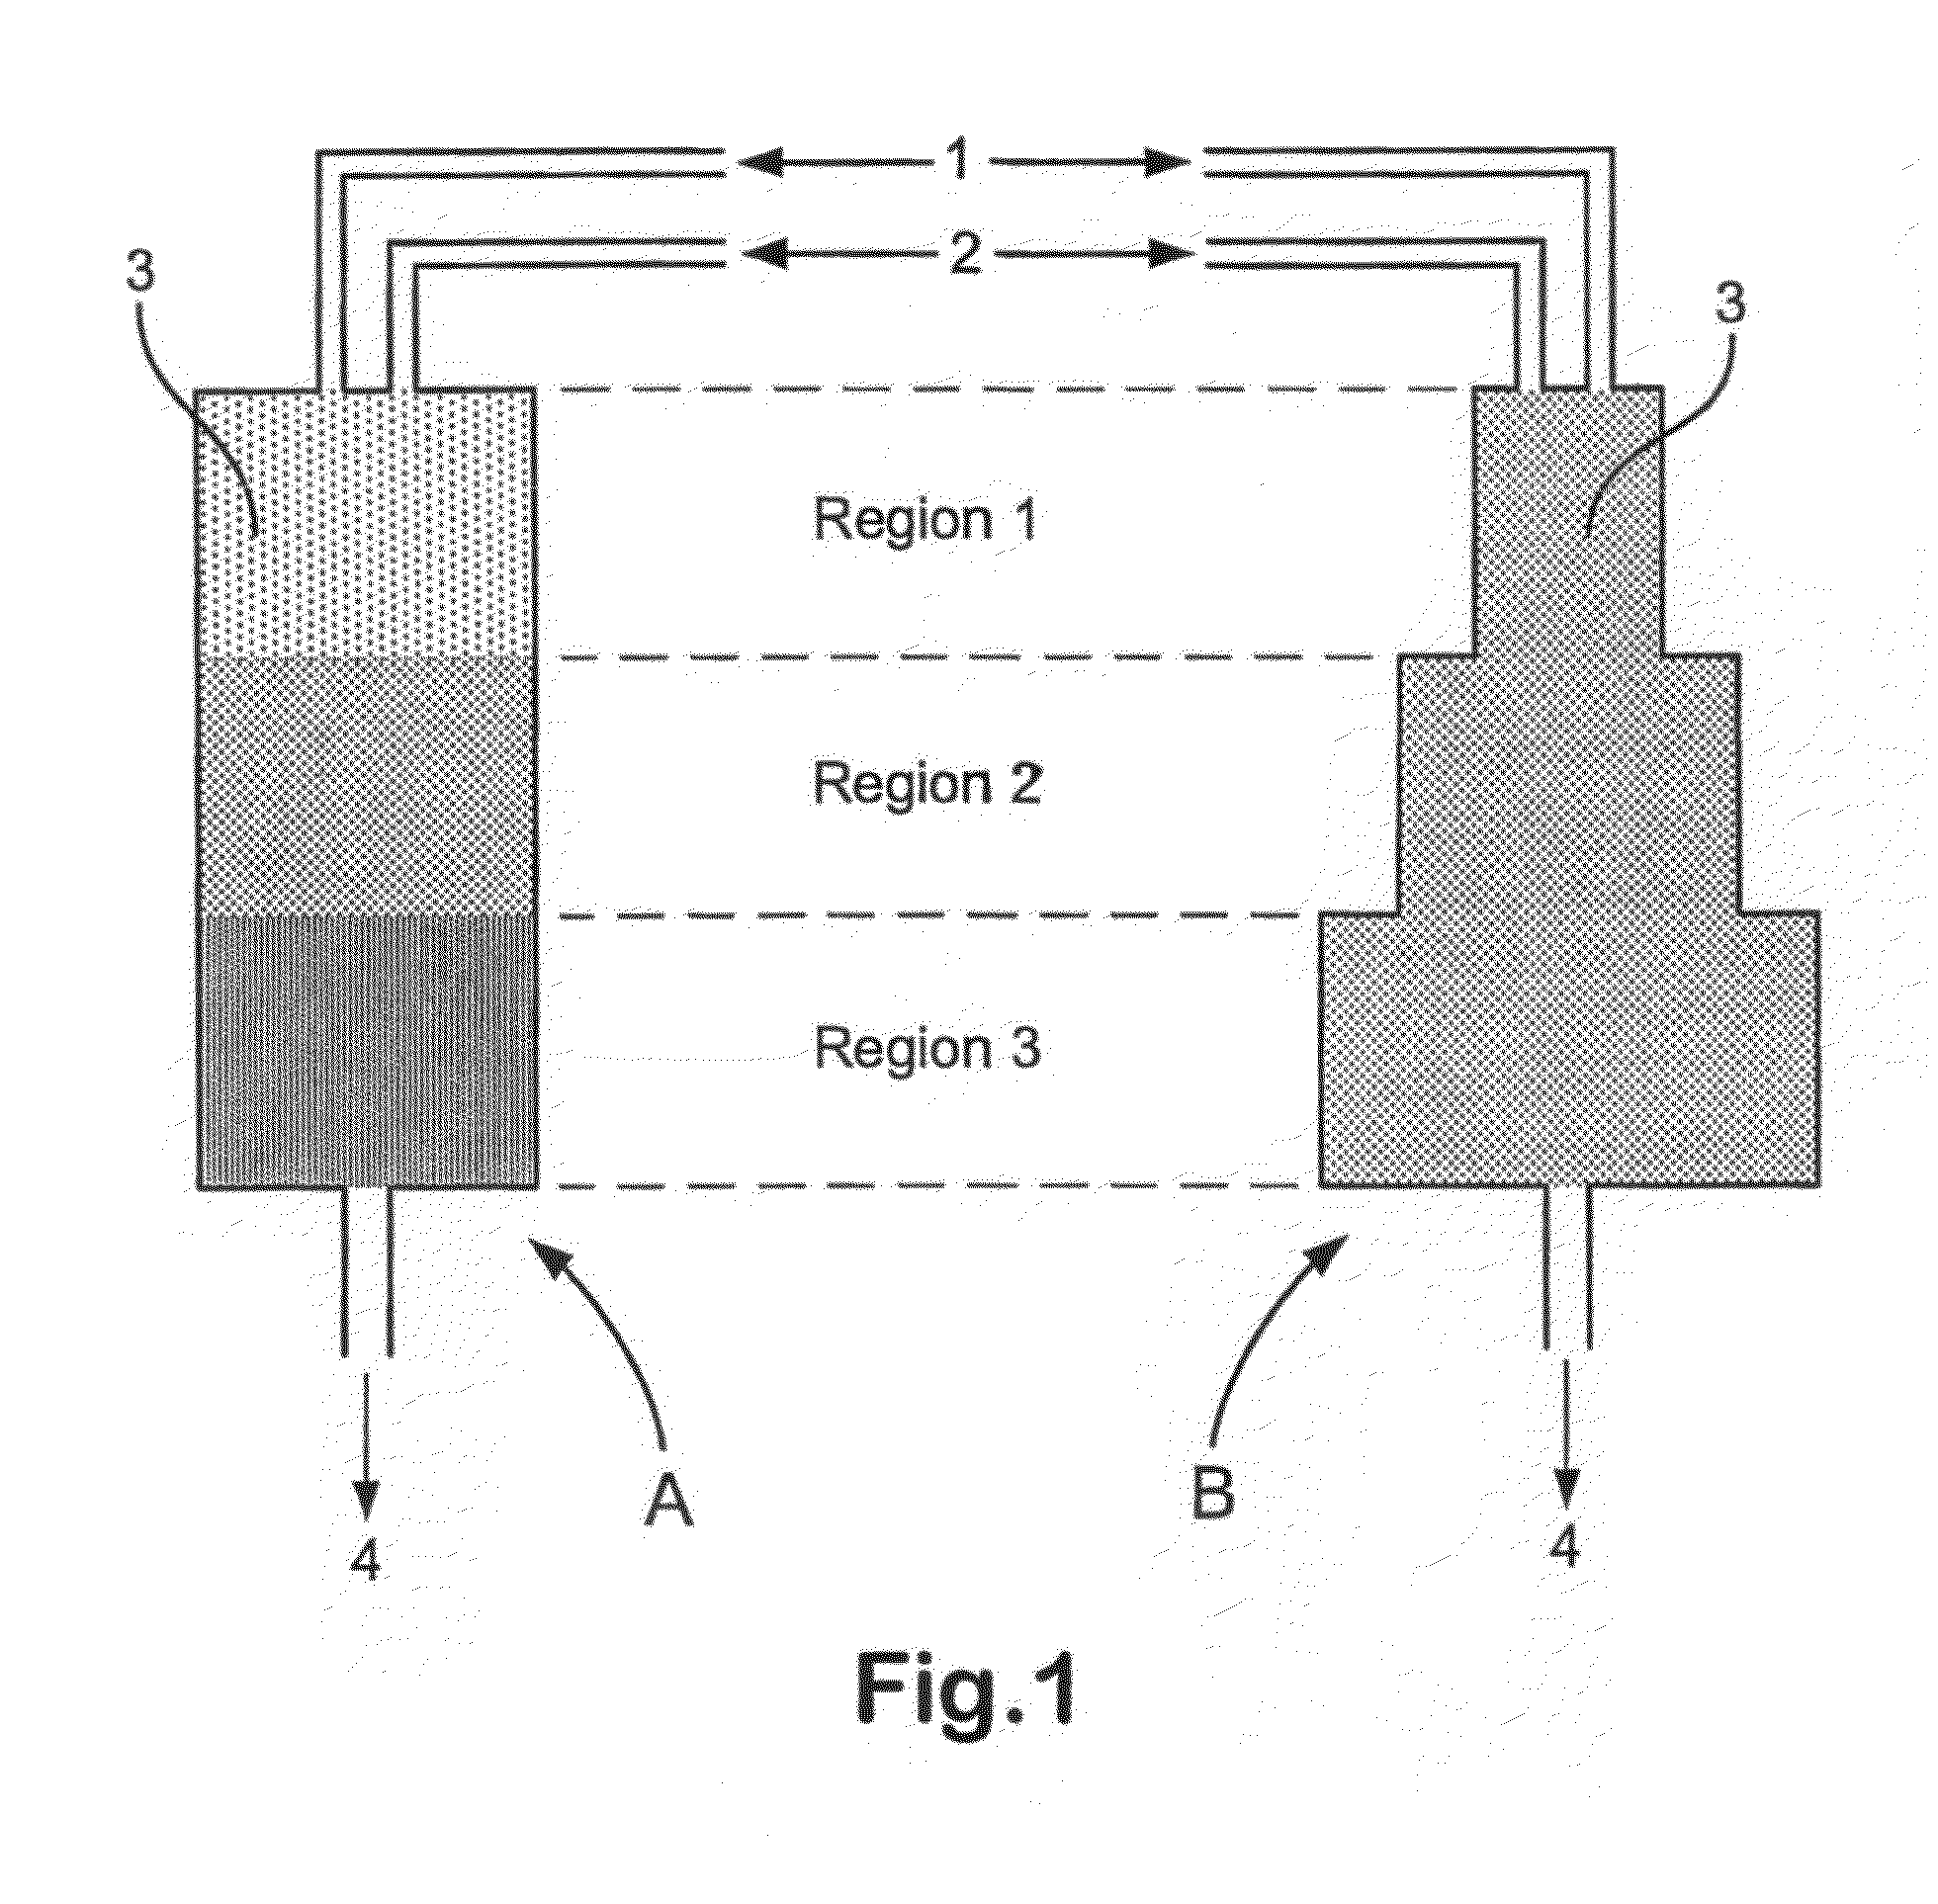 Process for producing condensed-phase product from one or more gas-phase reactants